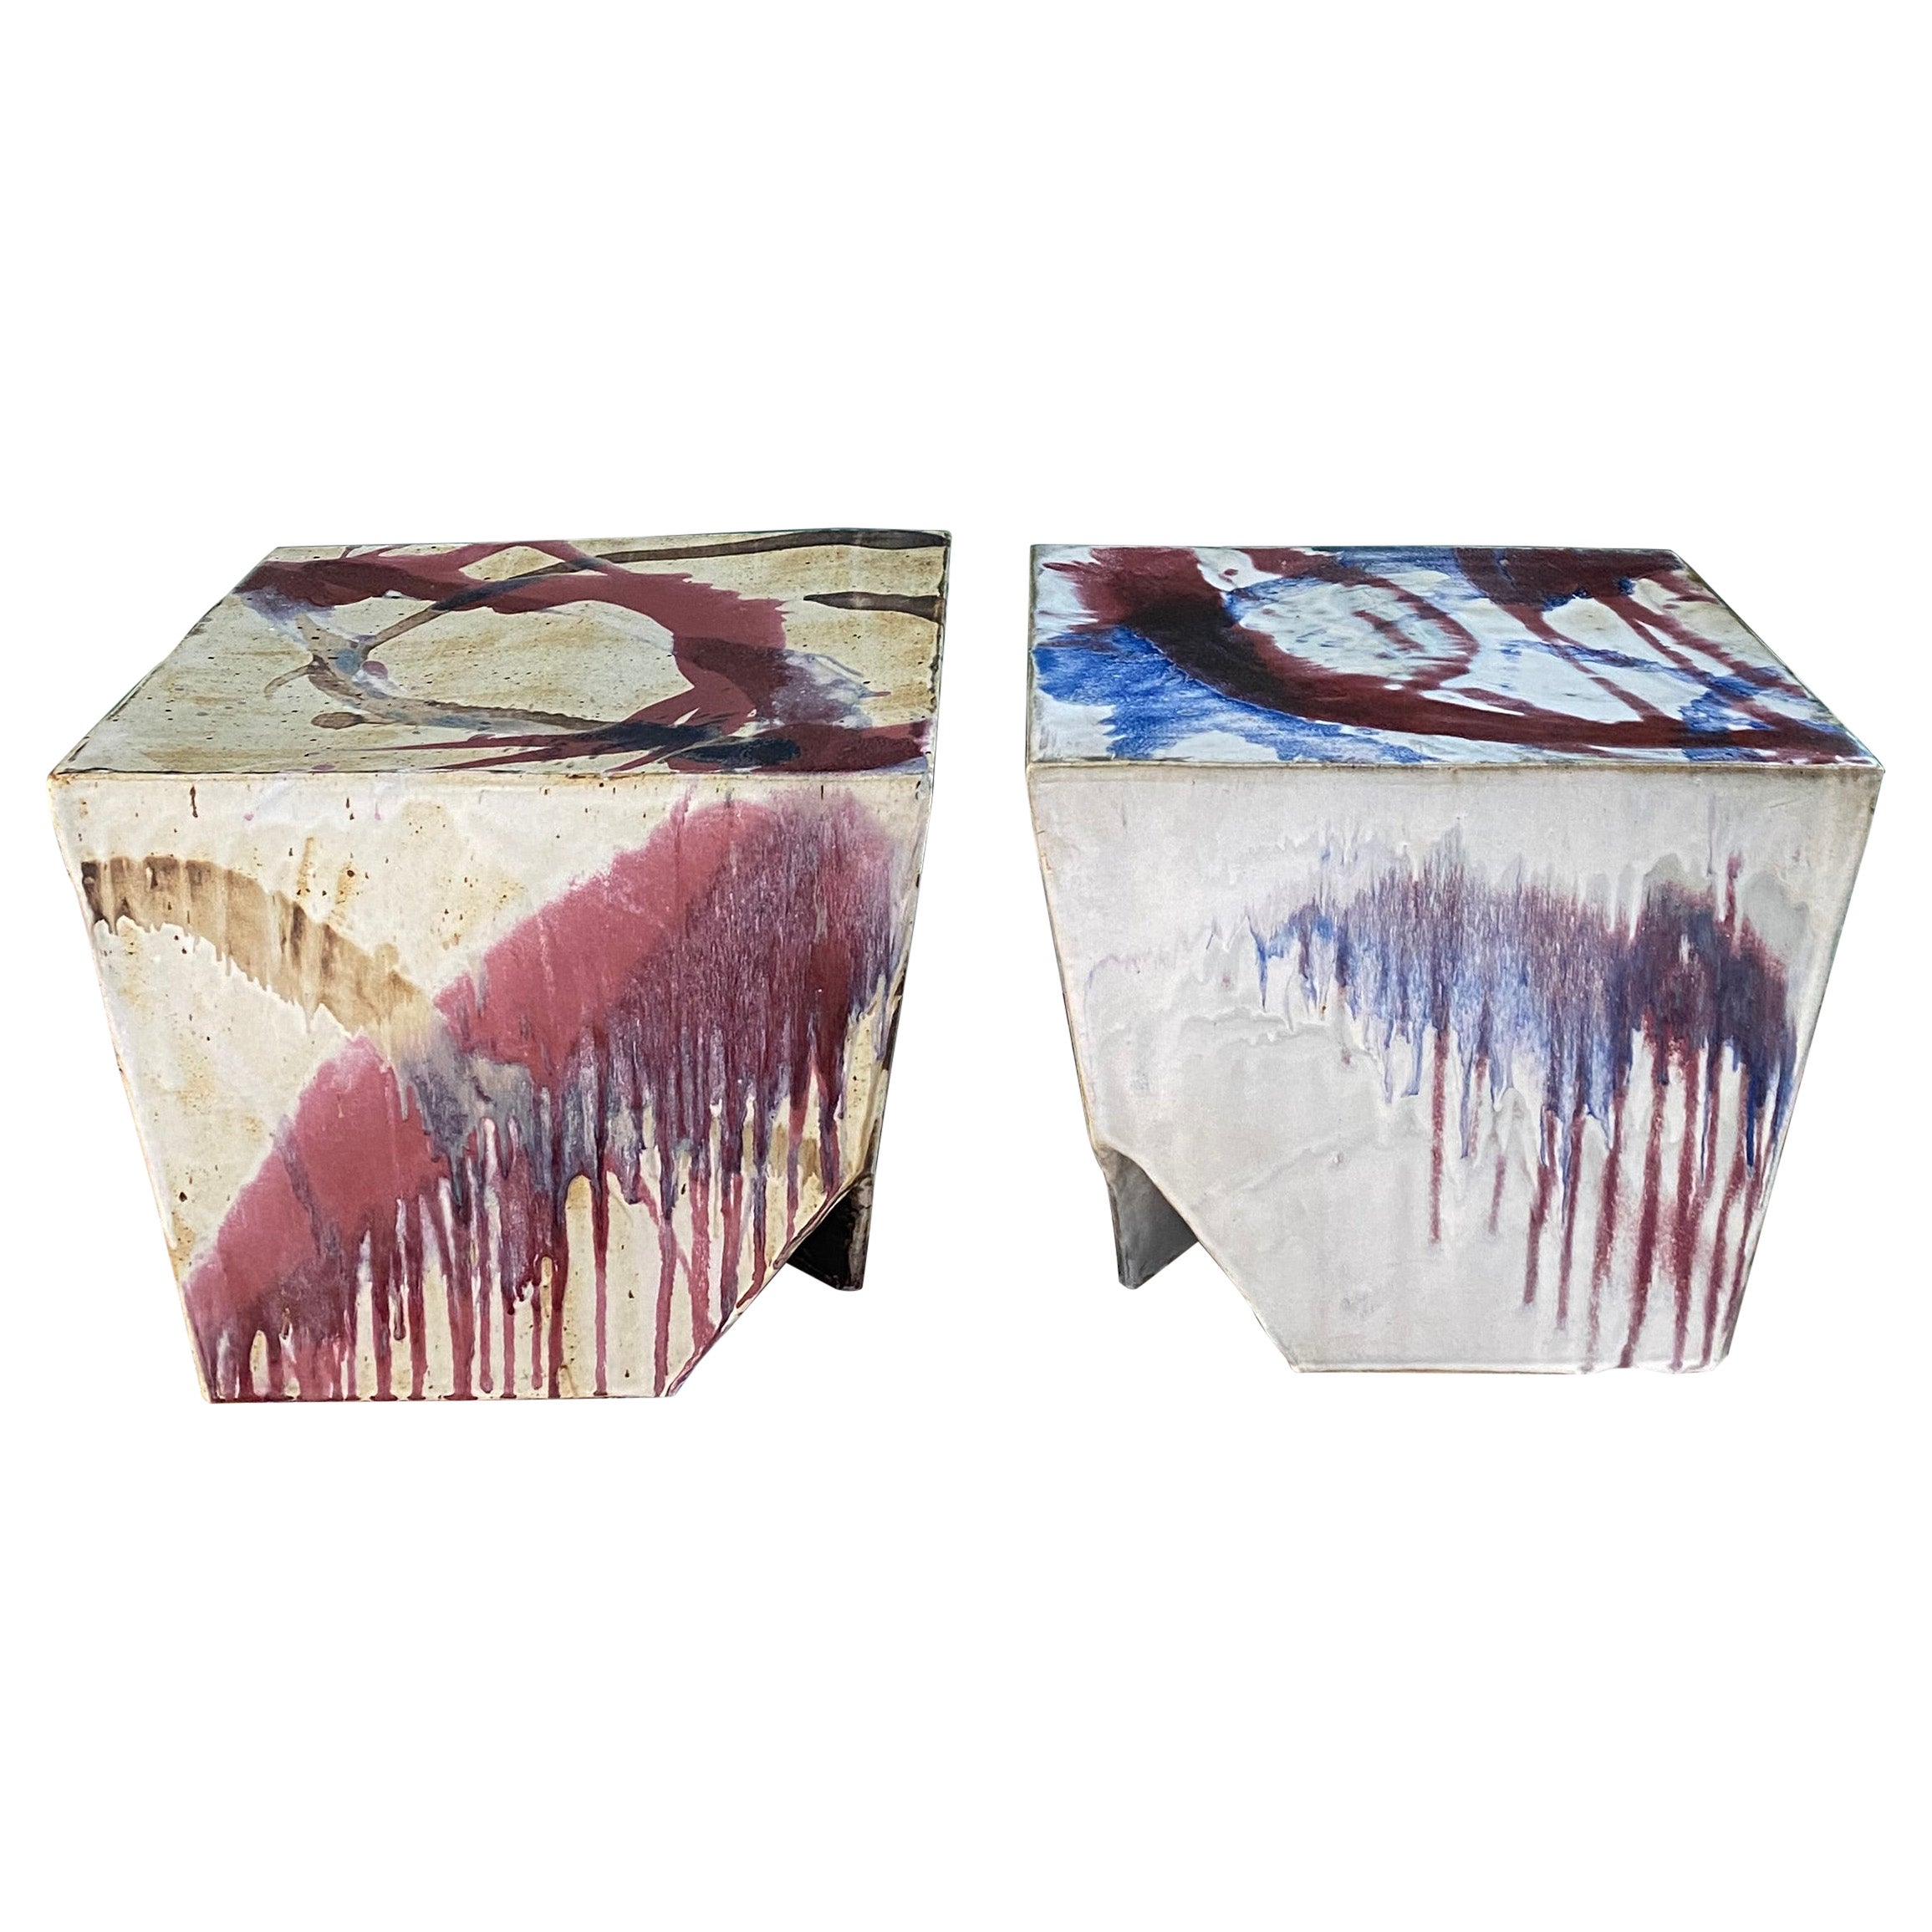 Vintage Abstract Ceramic Plinth Stools or Side Tables, Pair For Sale